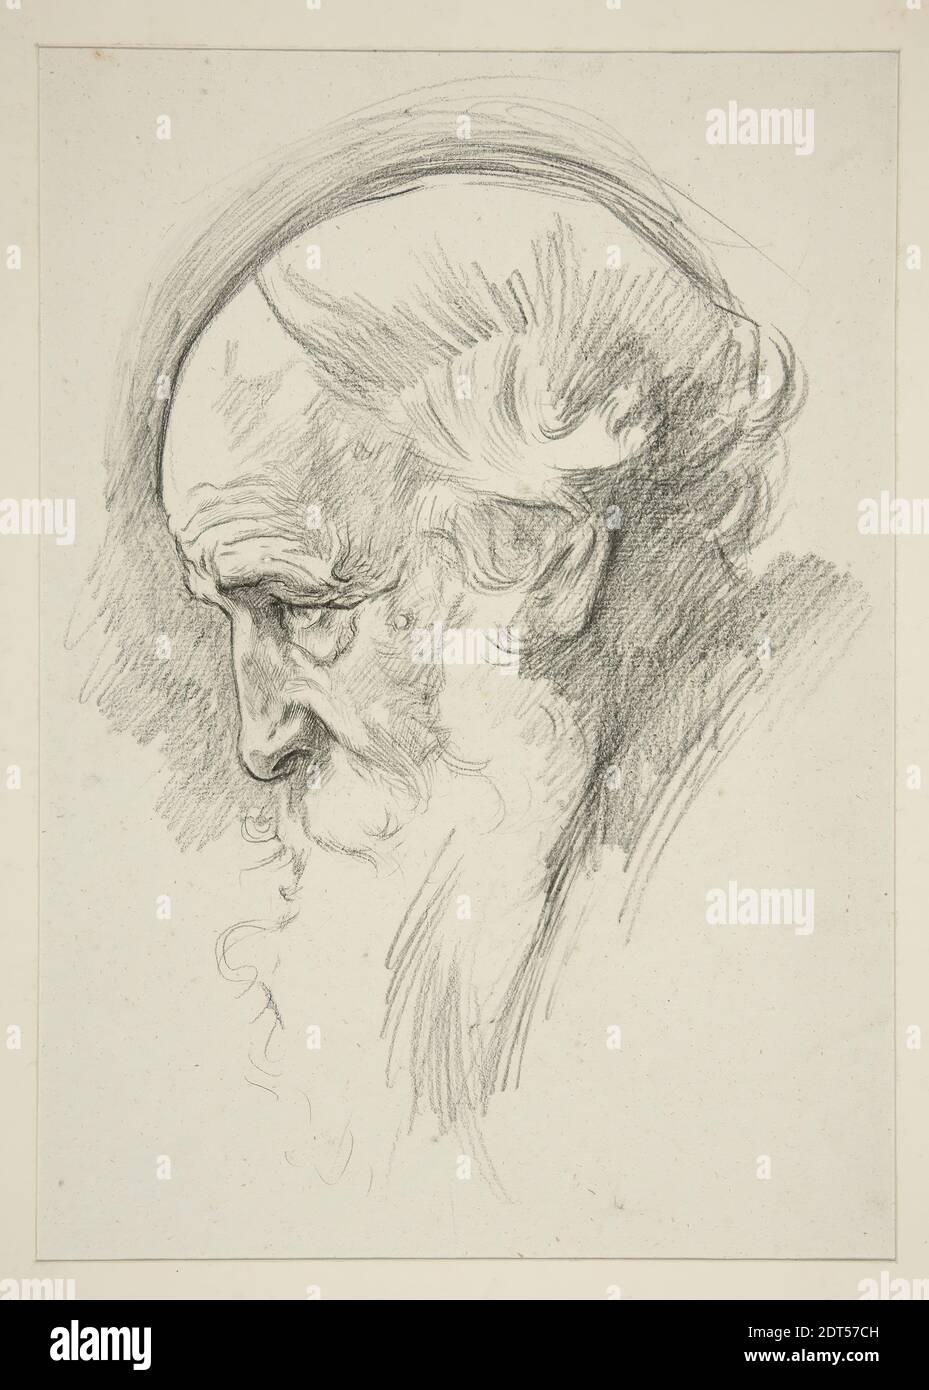 Artist: Edwin Austin Abbey, American, 1852–1911, M.A., 1897, Portrait of an old bearded man, in profile, Black chalk, Heavy white laid, 44.6 × 32.7 cm (17 9/16 × 12 7/8 in.), Made in United States, American, 19th century, Works on Paper - Drawings and Watercolors Stock Photo